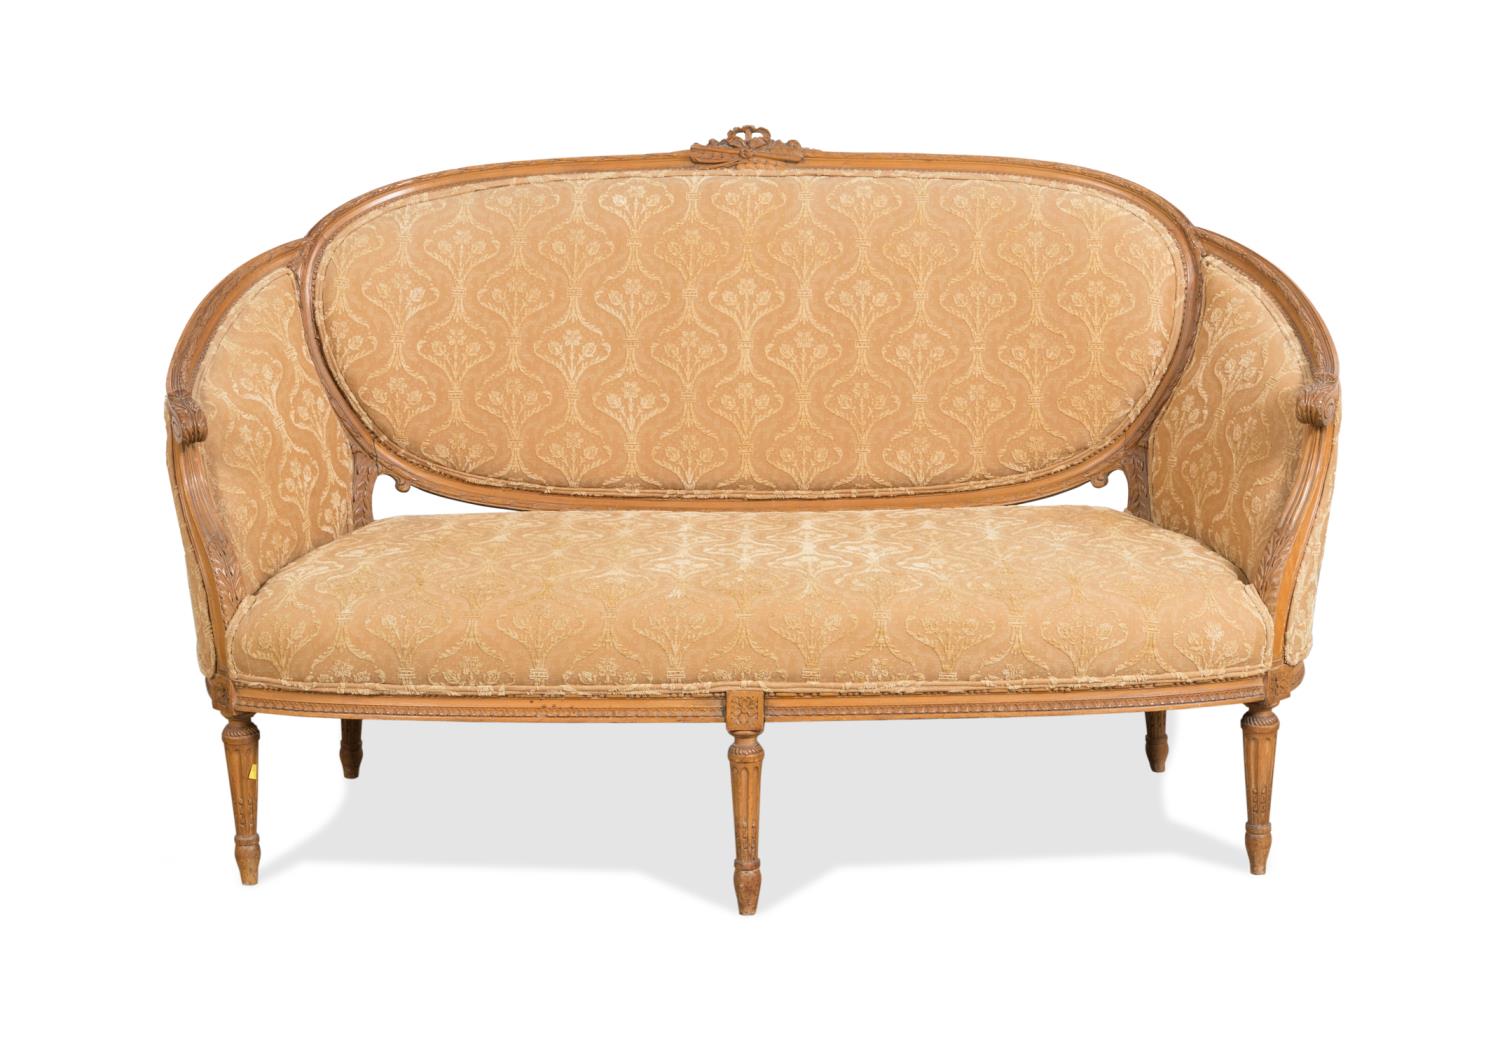 FRENCH LOUIS XVI STYLE CORAL UPHOLSTERED 2f9901